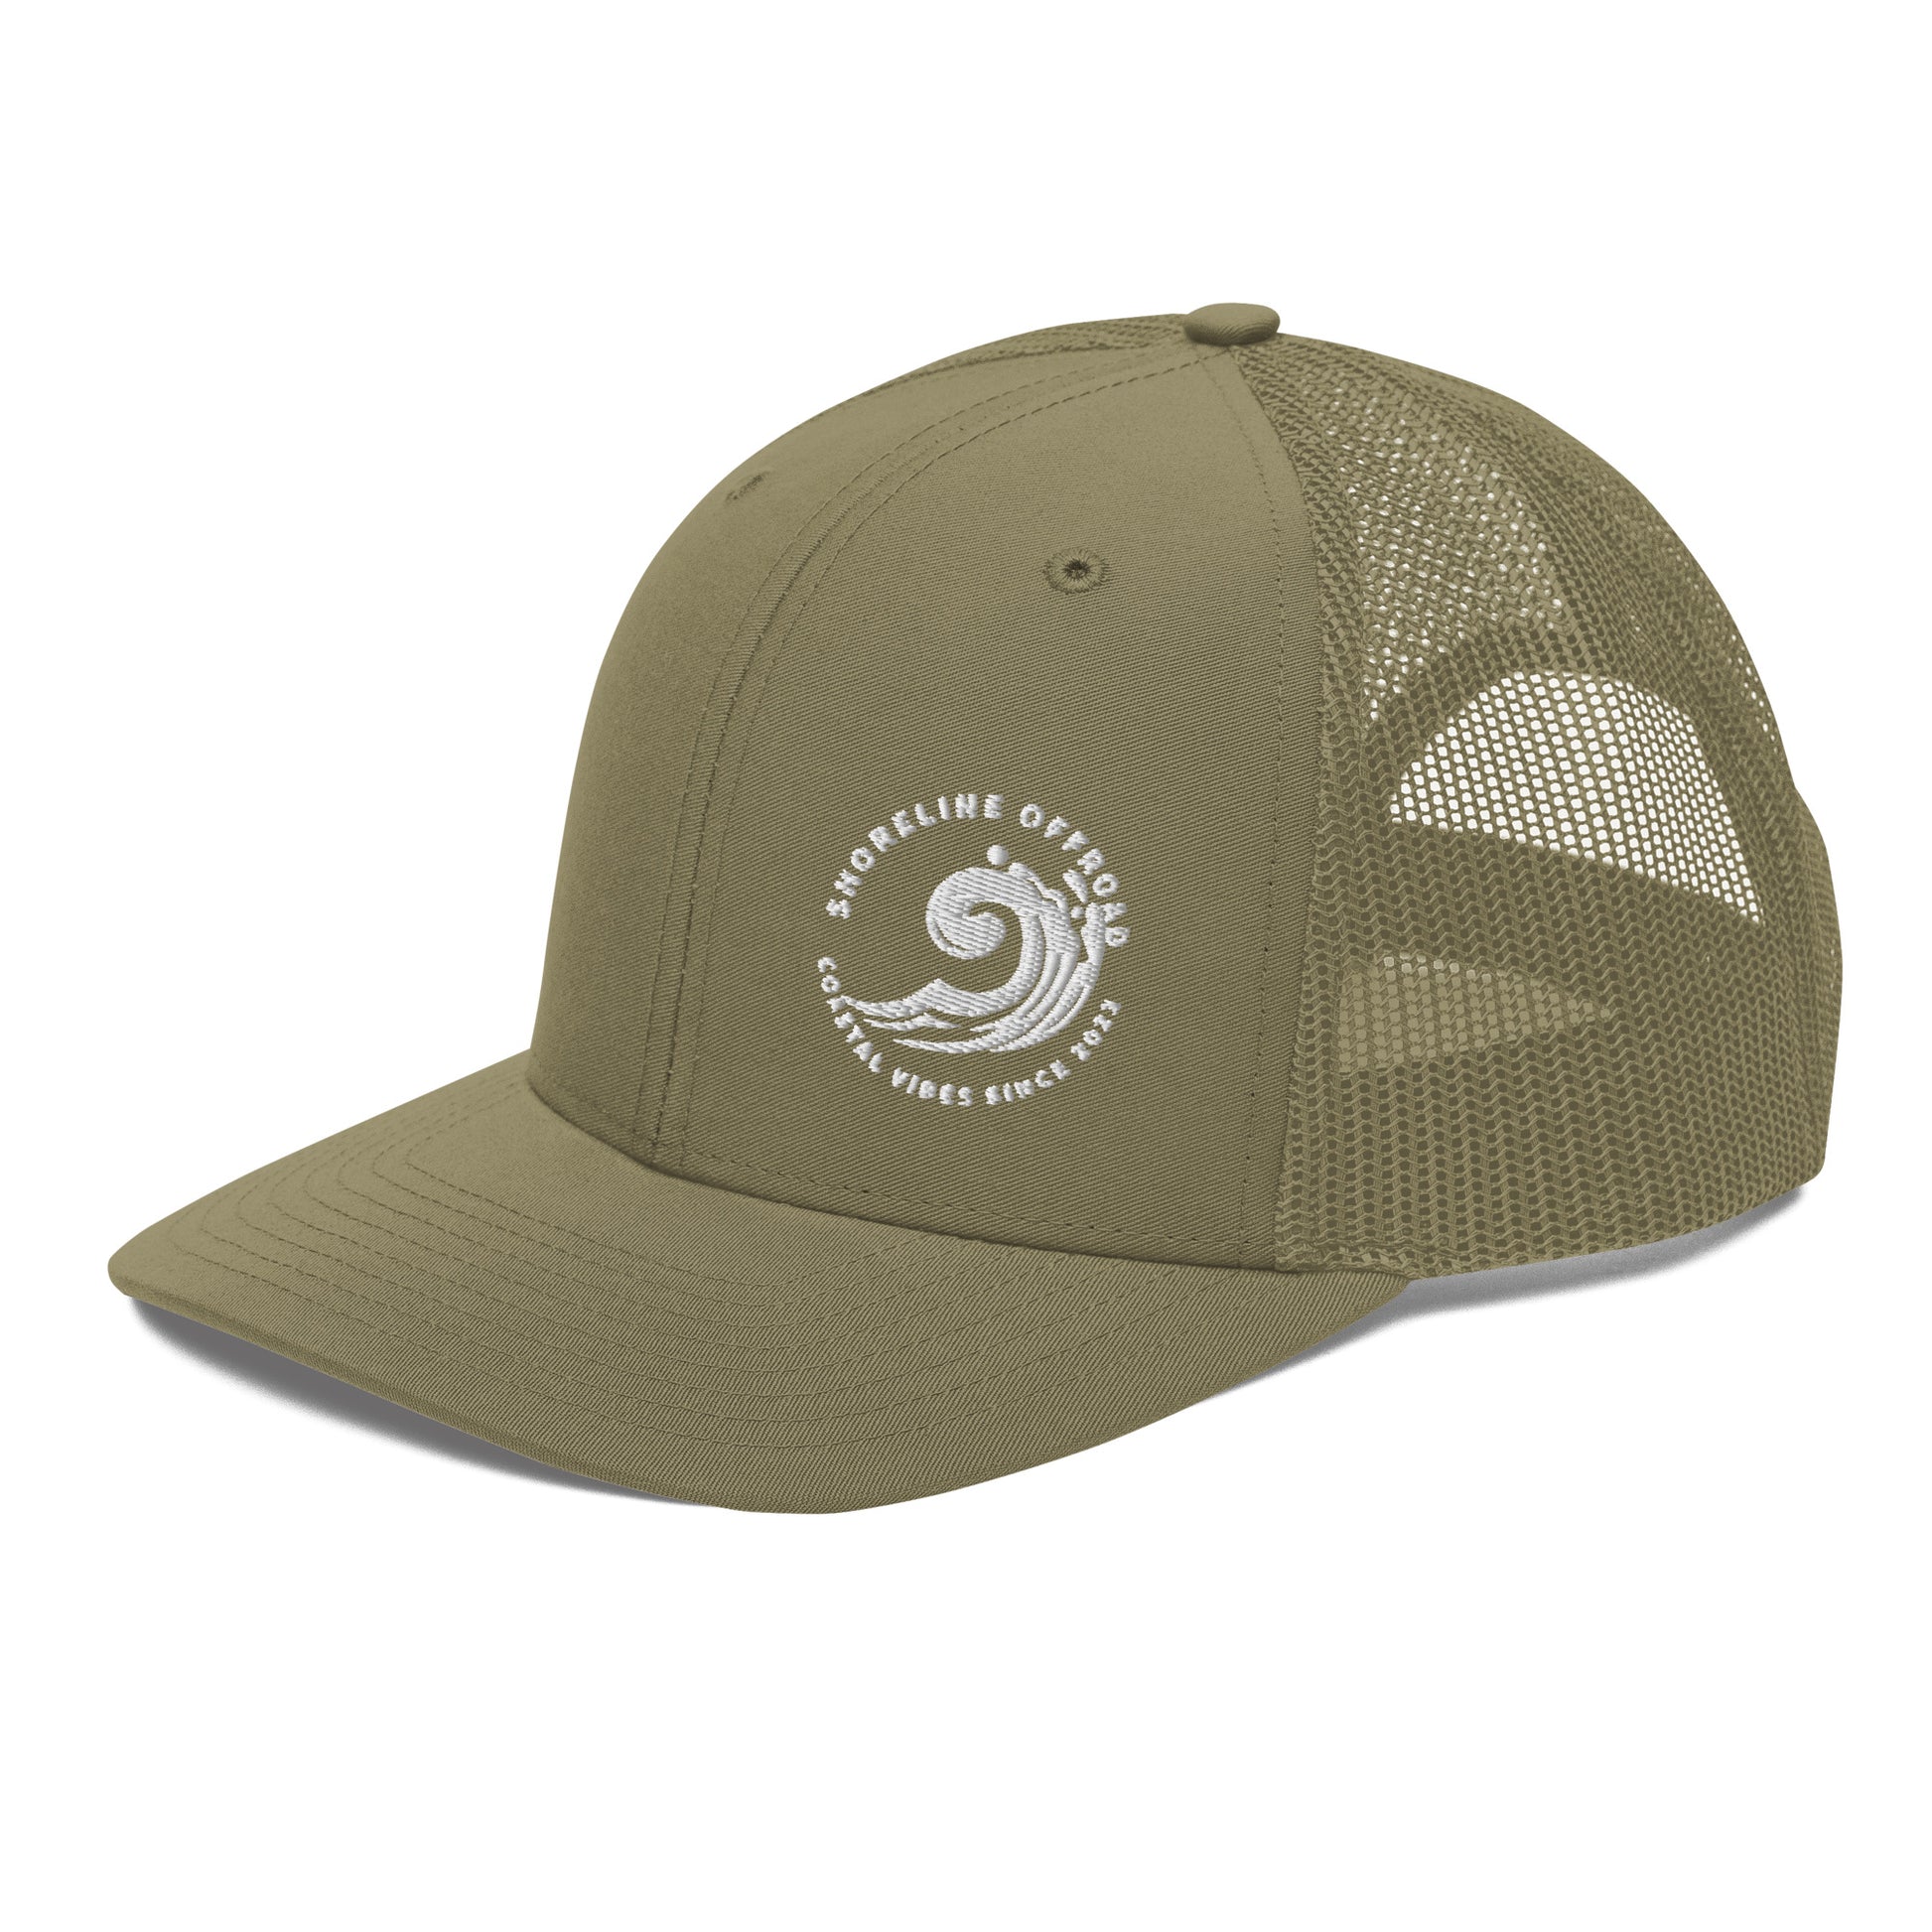 a green trucker hat with a white logo